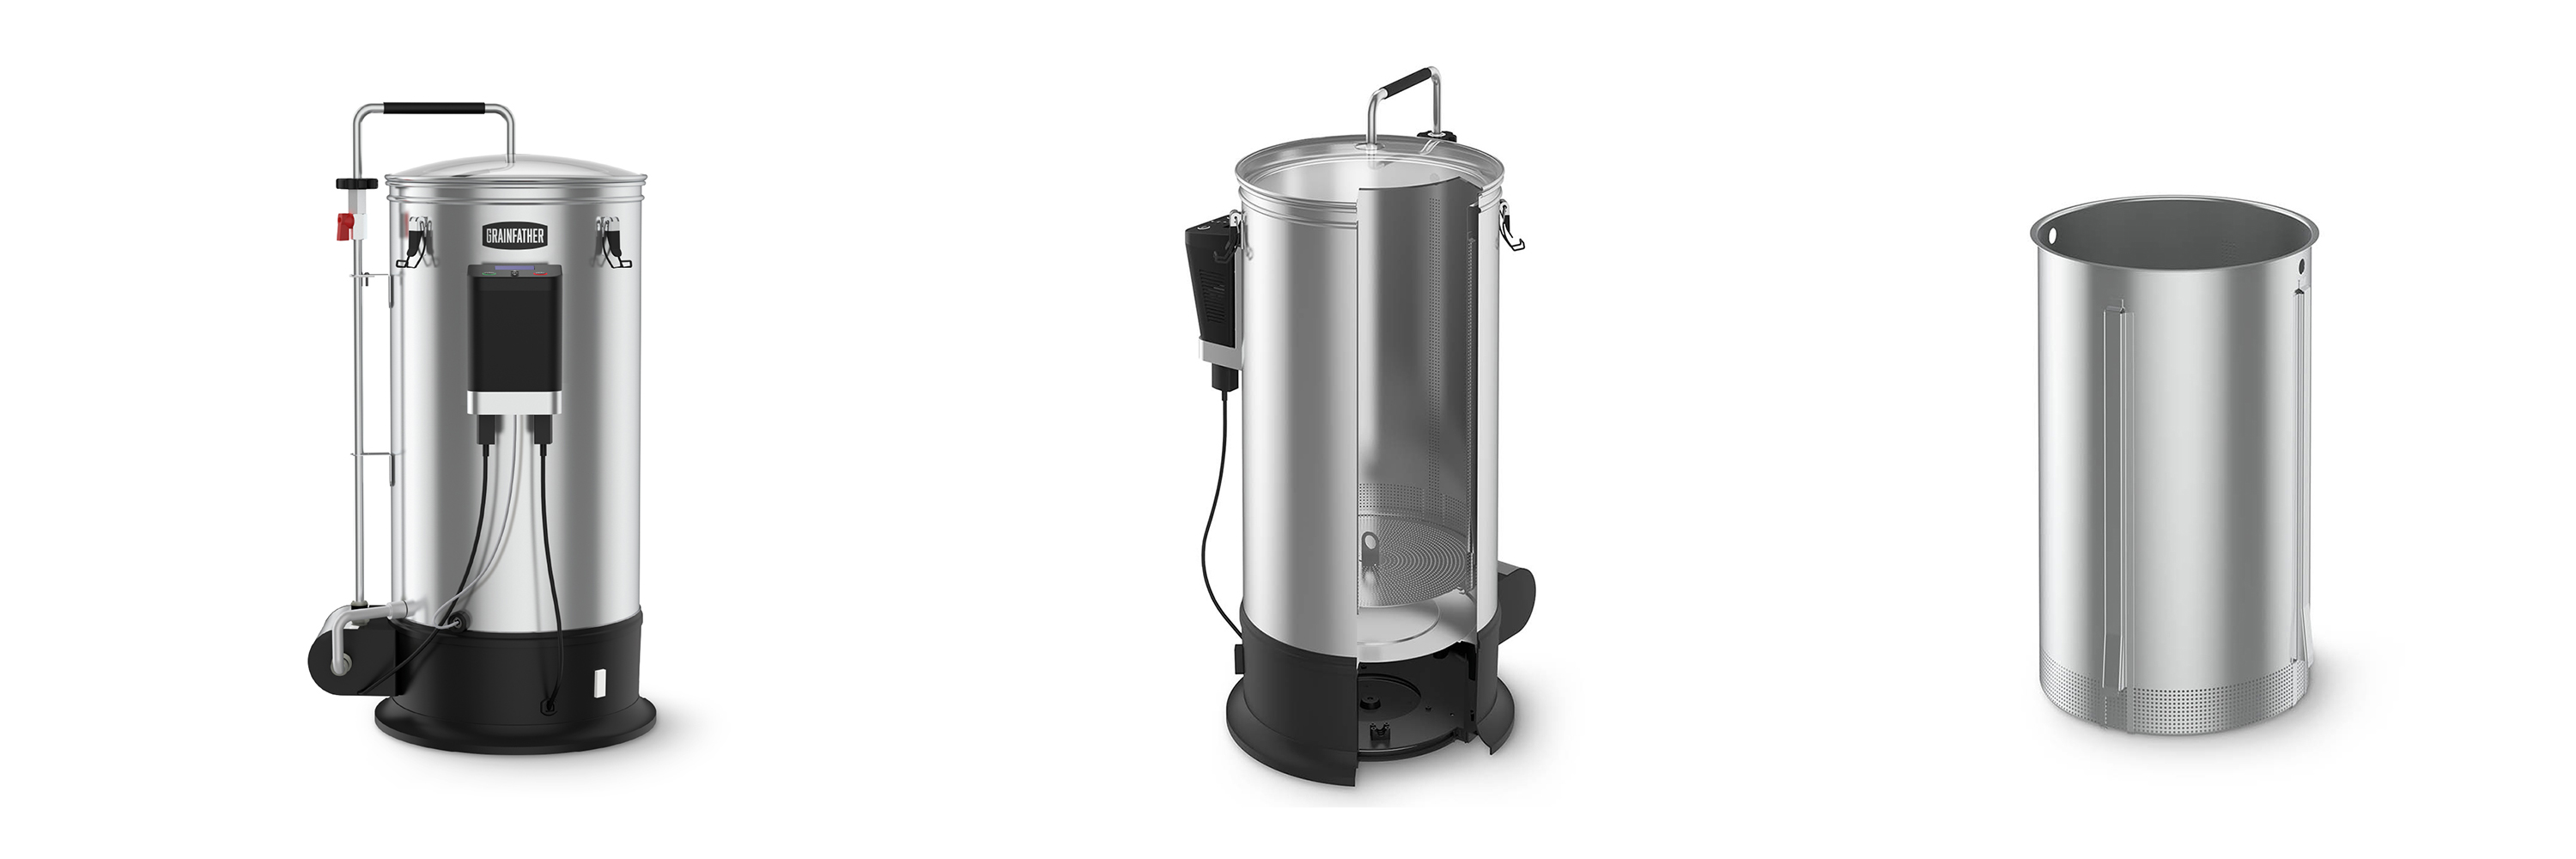 Grainfather G30 v3 Features